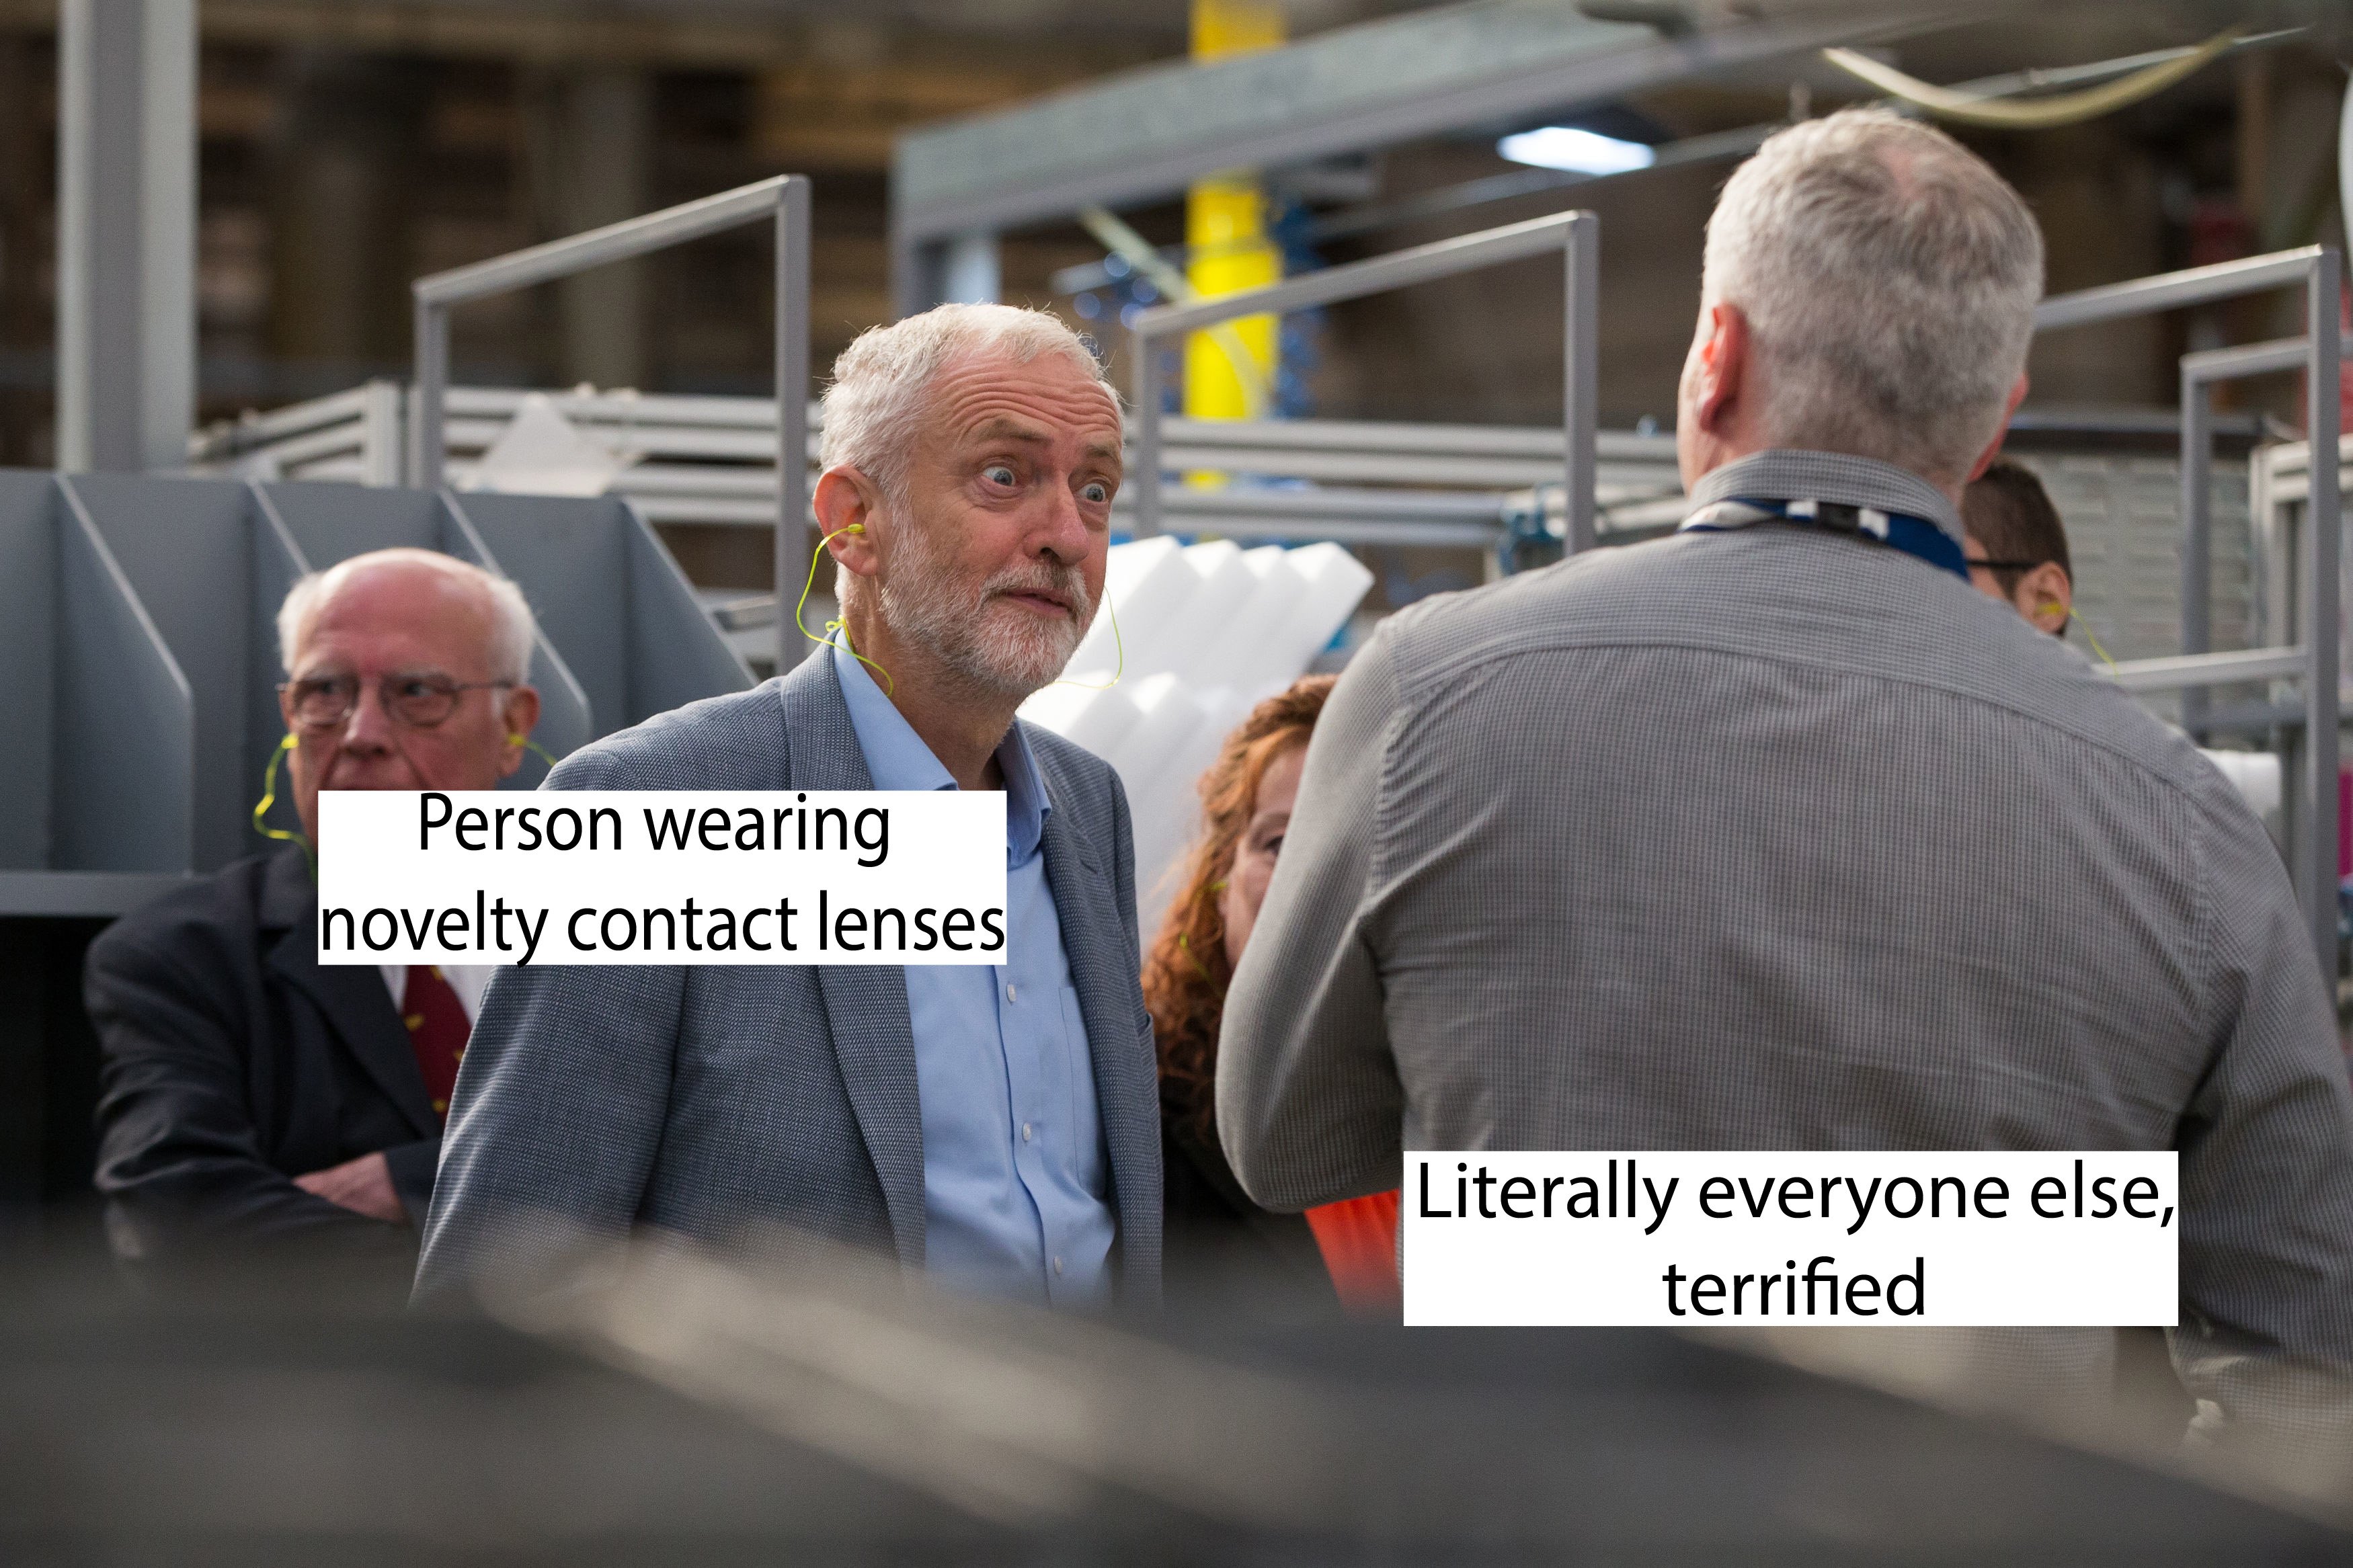 Corbyn looking at someone with beady eyes